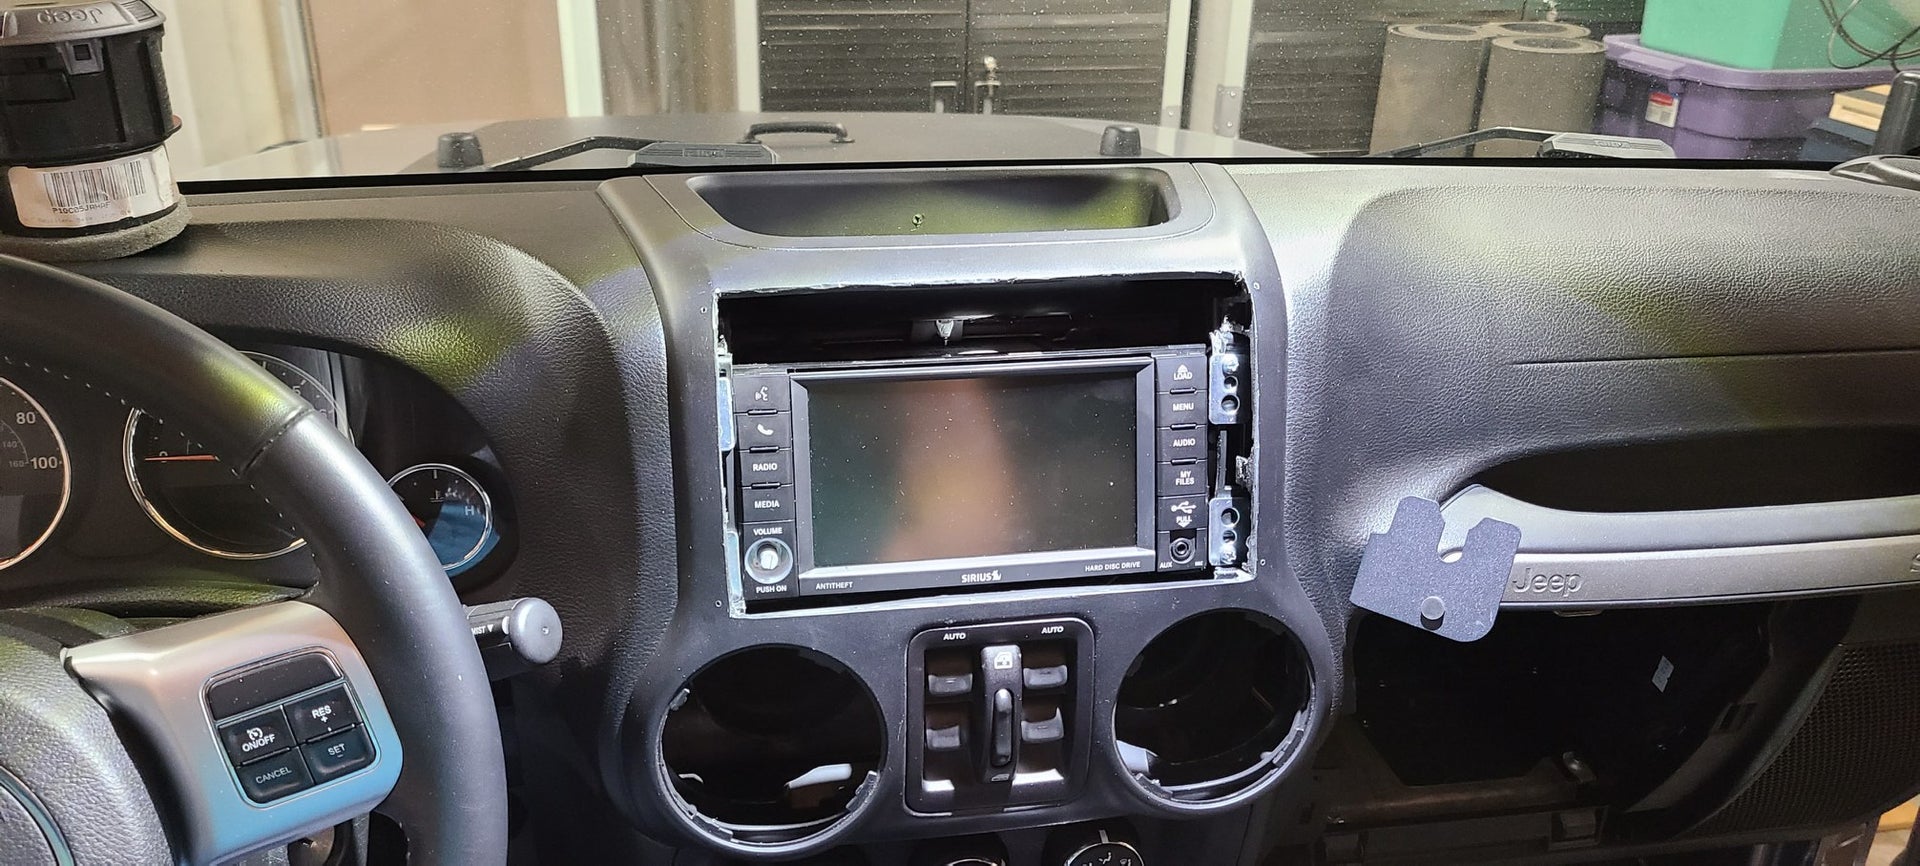 How Do You Mount Your iPad? | Page 8 | Jeep Wrangler Forum